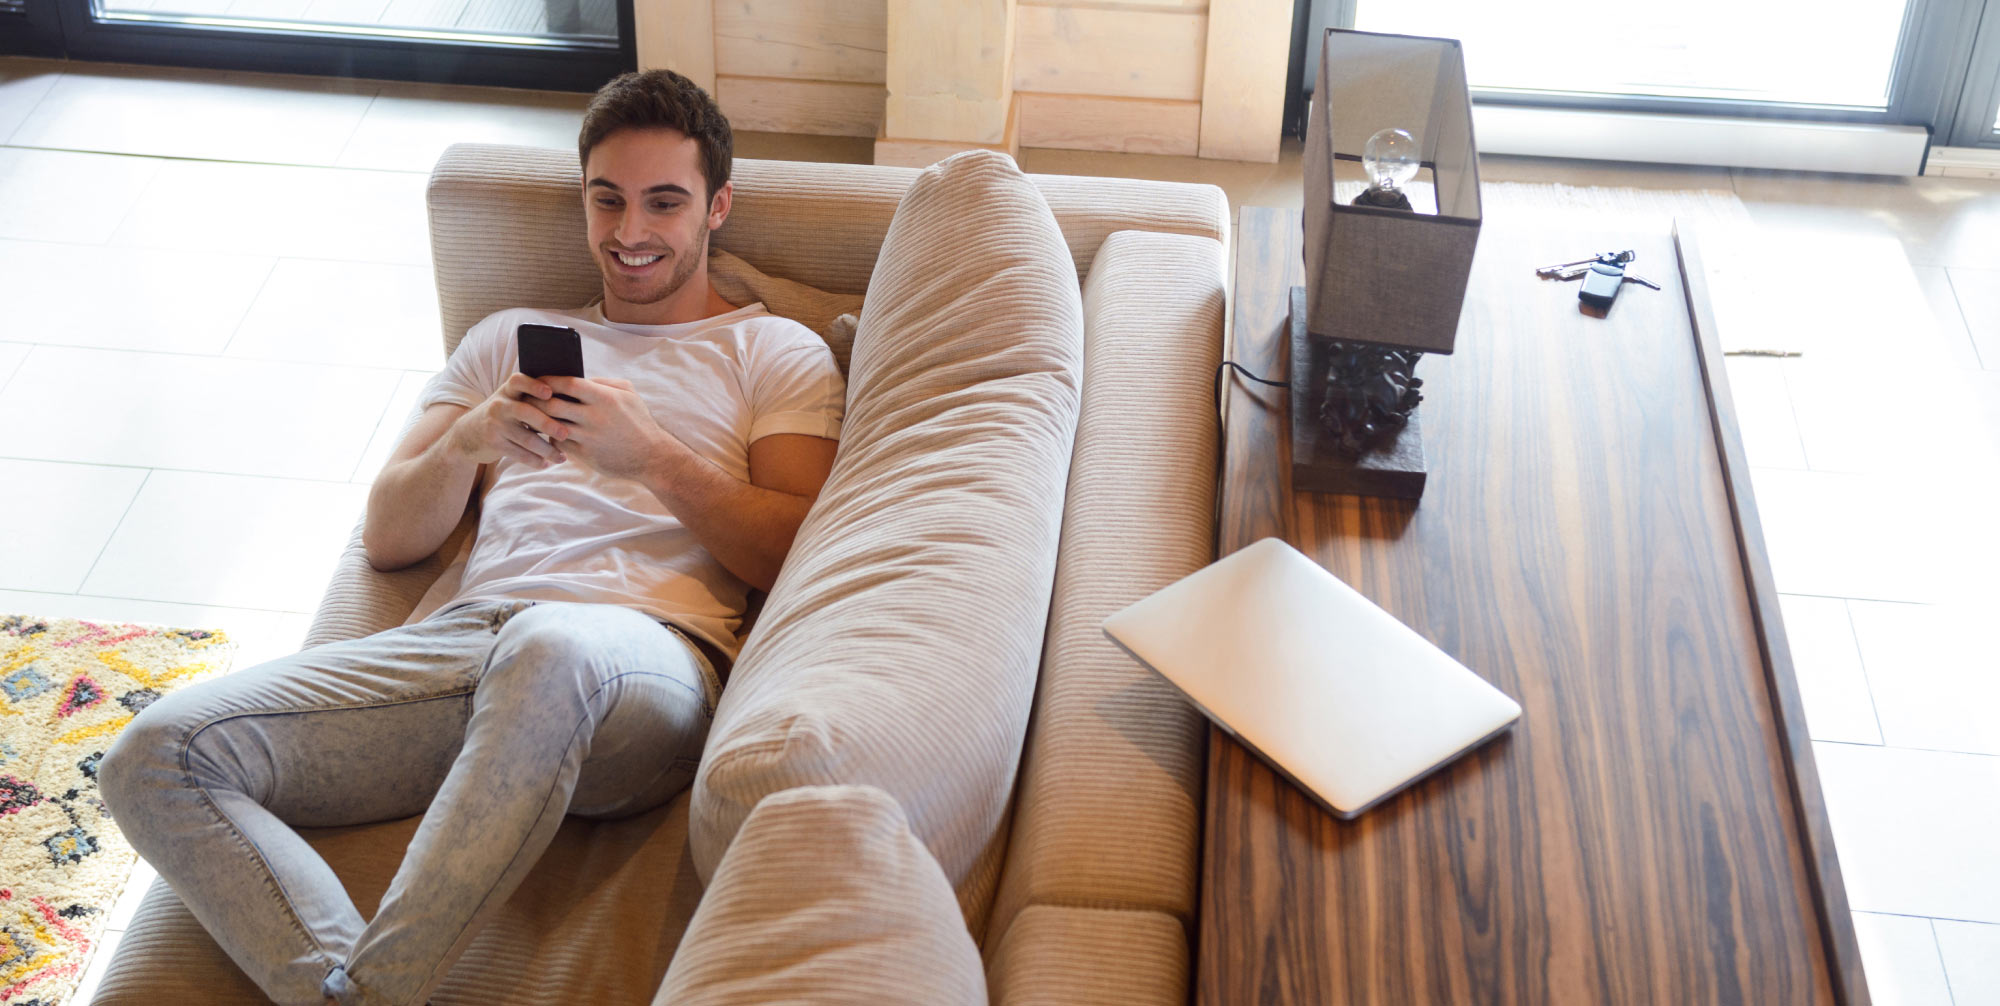 https://flame-tec.com/wp-content/uploads/2021/01/Man-on-sofa-with-phone.jpg